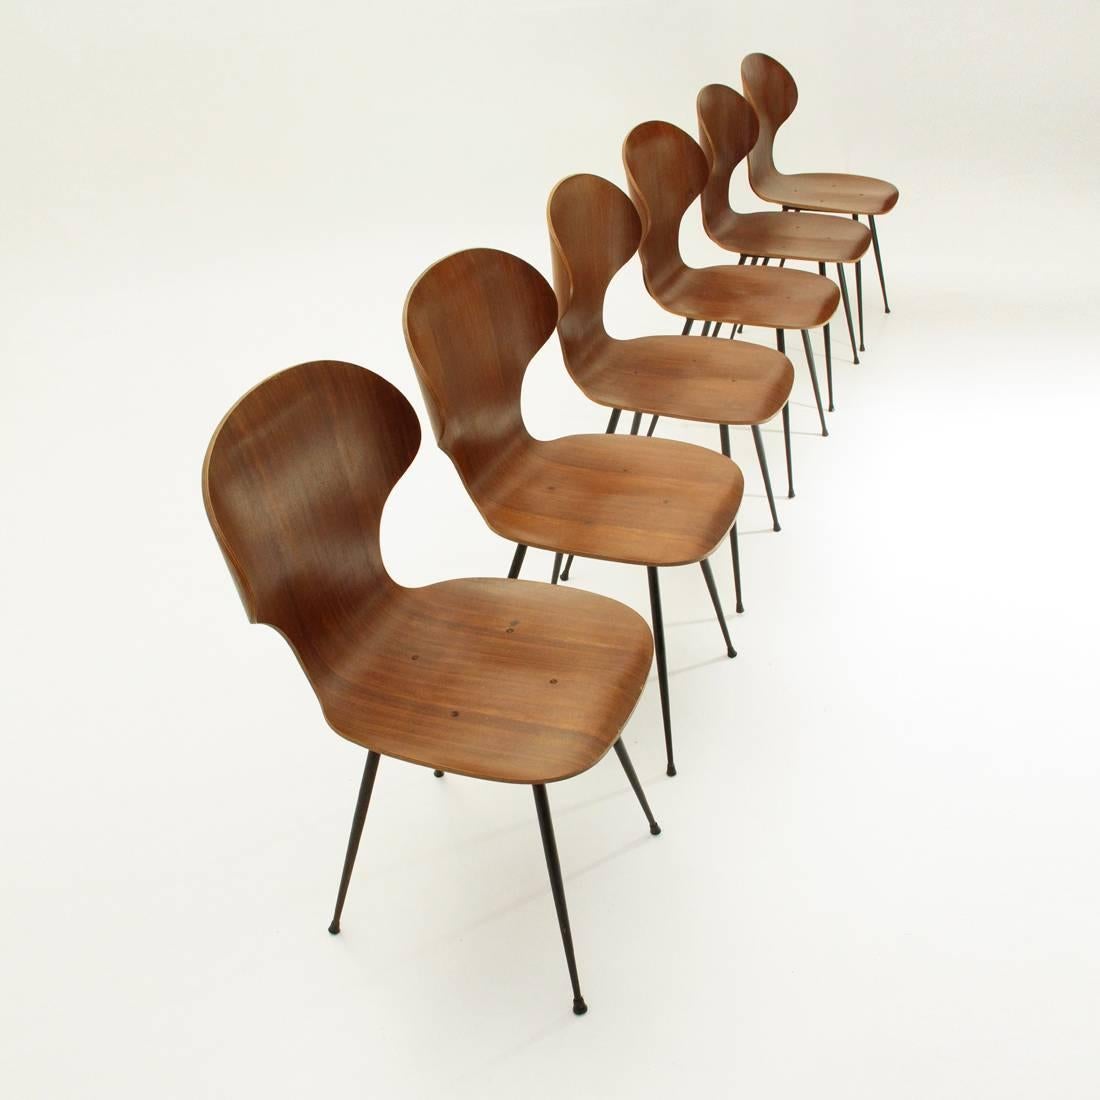 Mid-Century Modern Six Dining Chairs by Carlo Ratti for Industria Legni Curvati, 1950s